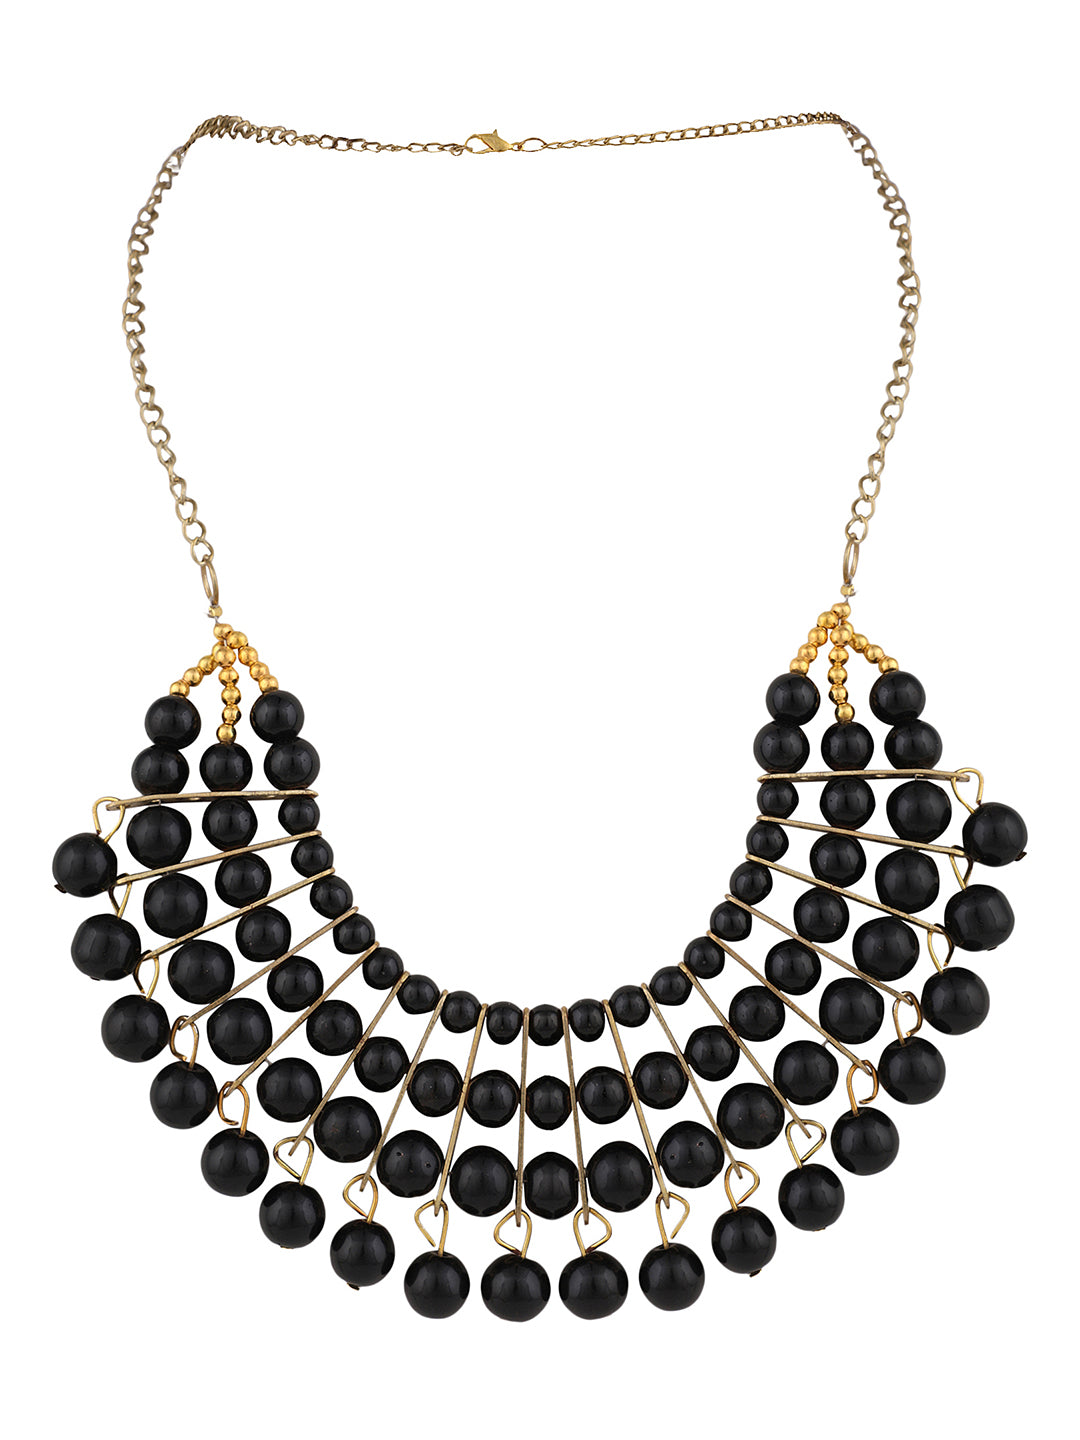 Women's Designer Black Bead Stacked Gold-Plated Collar Necklace - Anikas Creation